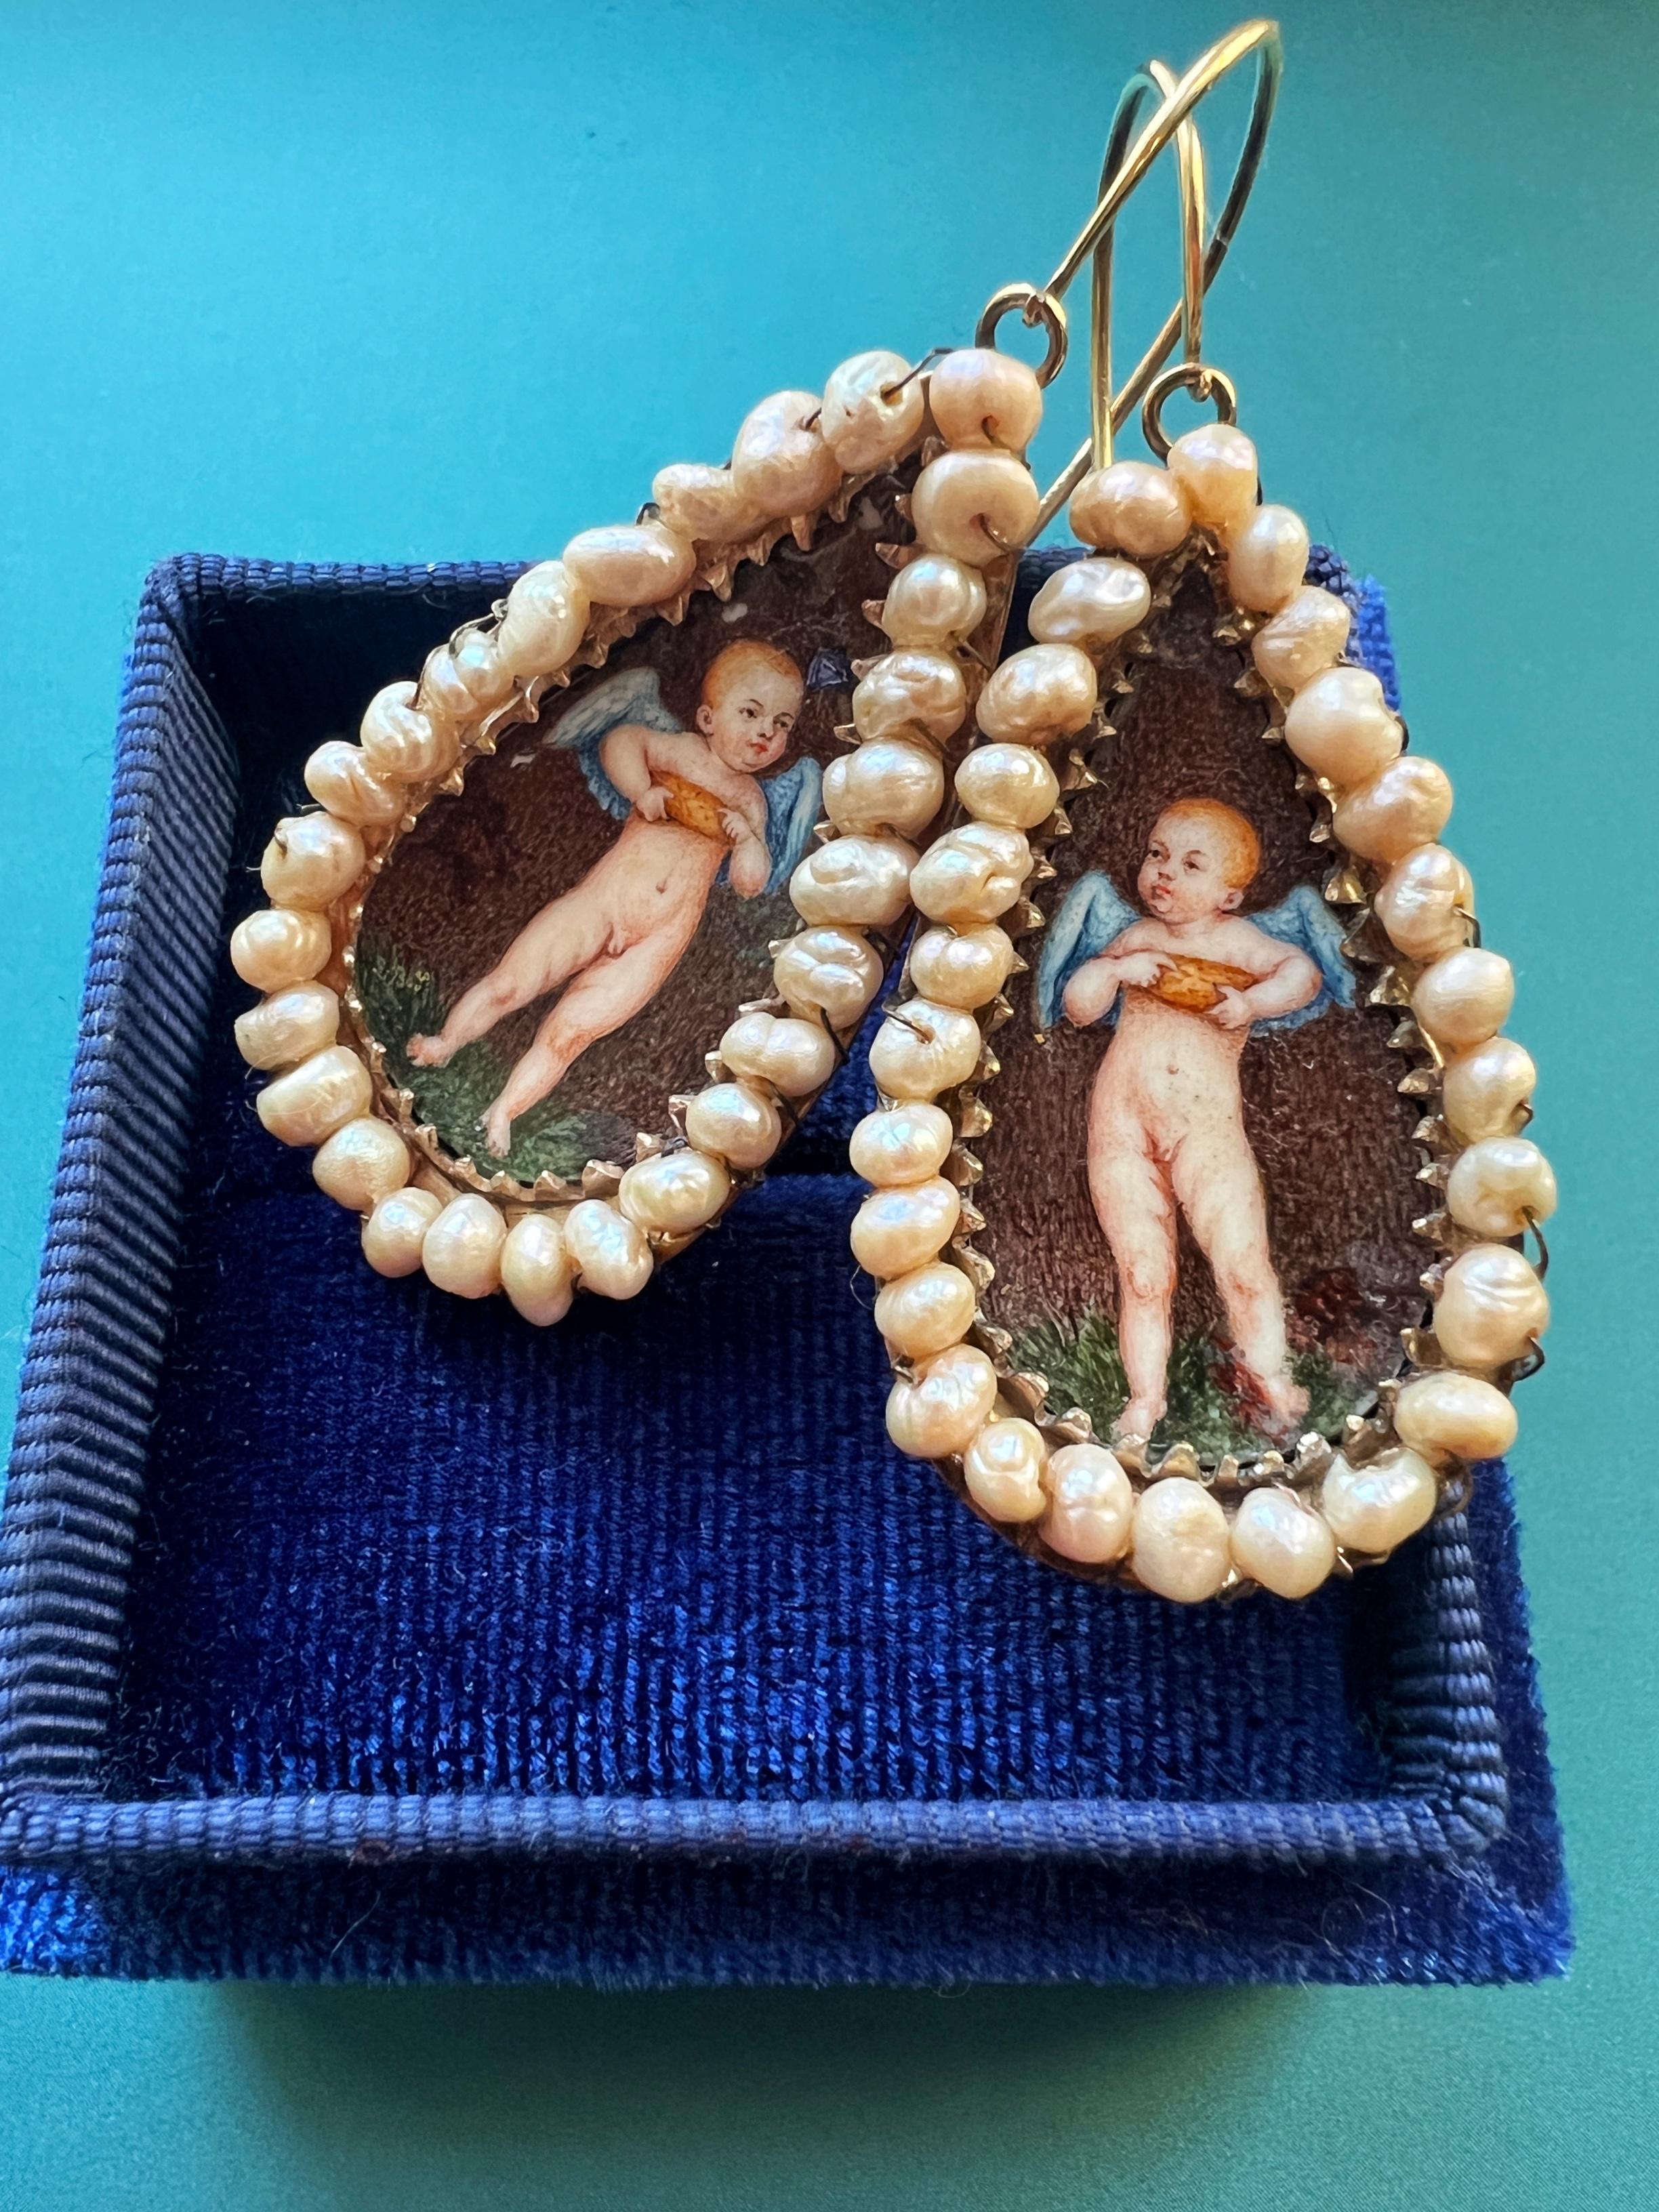 For sale a very rare pair of Italian antique 14k gold earrings from the late 18th century, featuring two large pear-shaped, enameled cherubs.

On each side, the cherub is depicted on foot, facing forwards and nude with blue color wings. He holds a